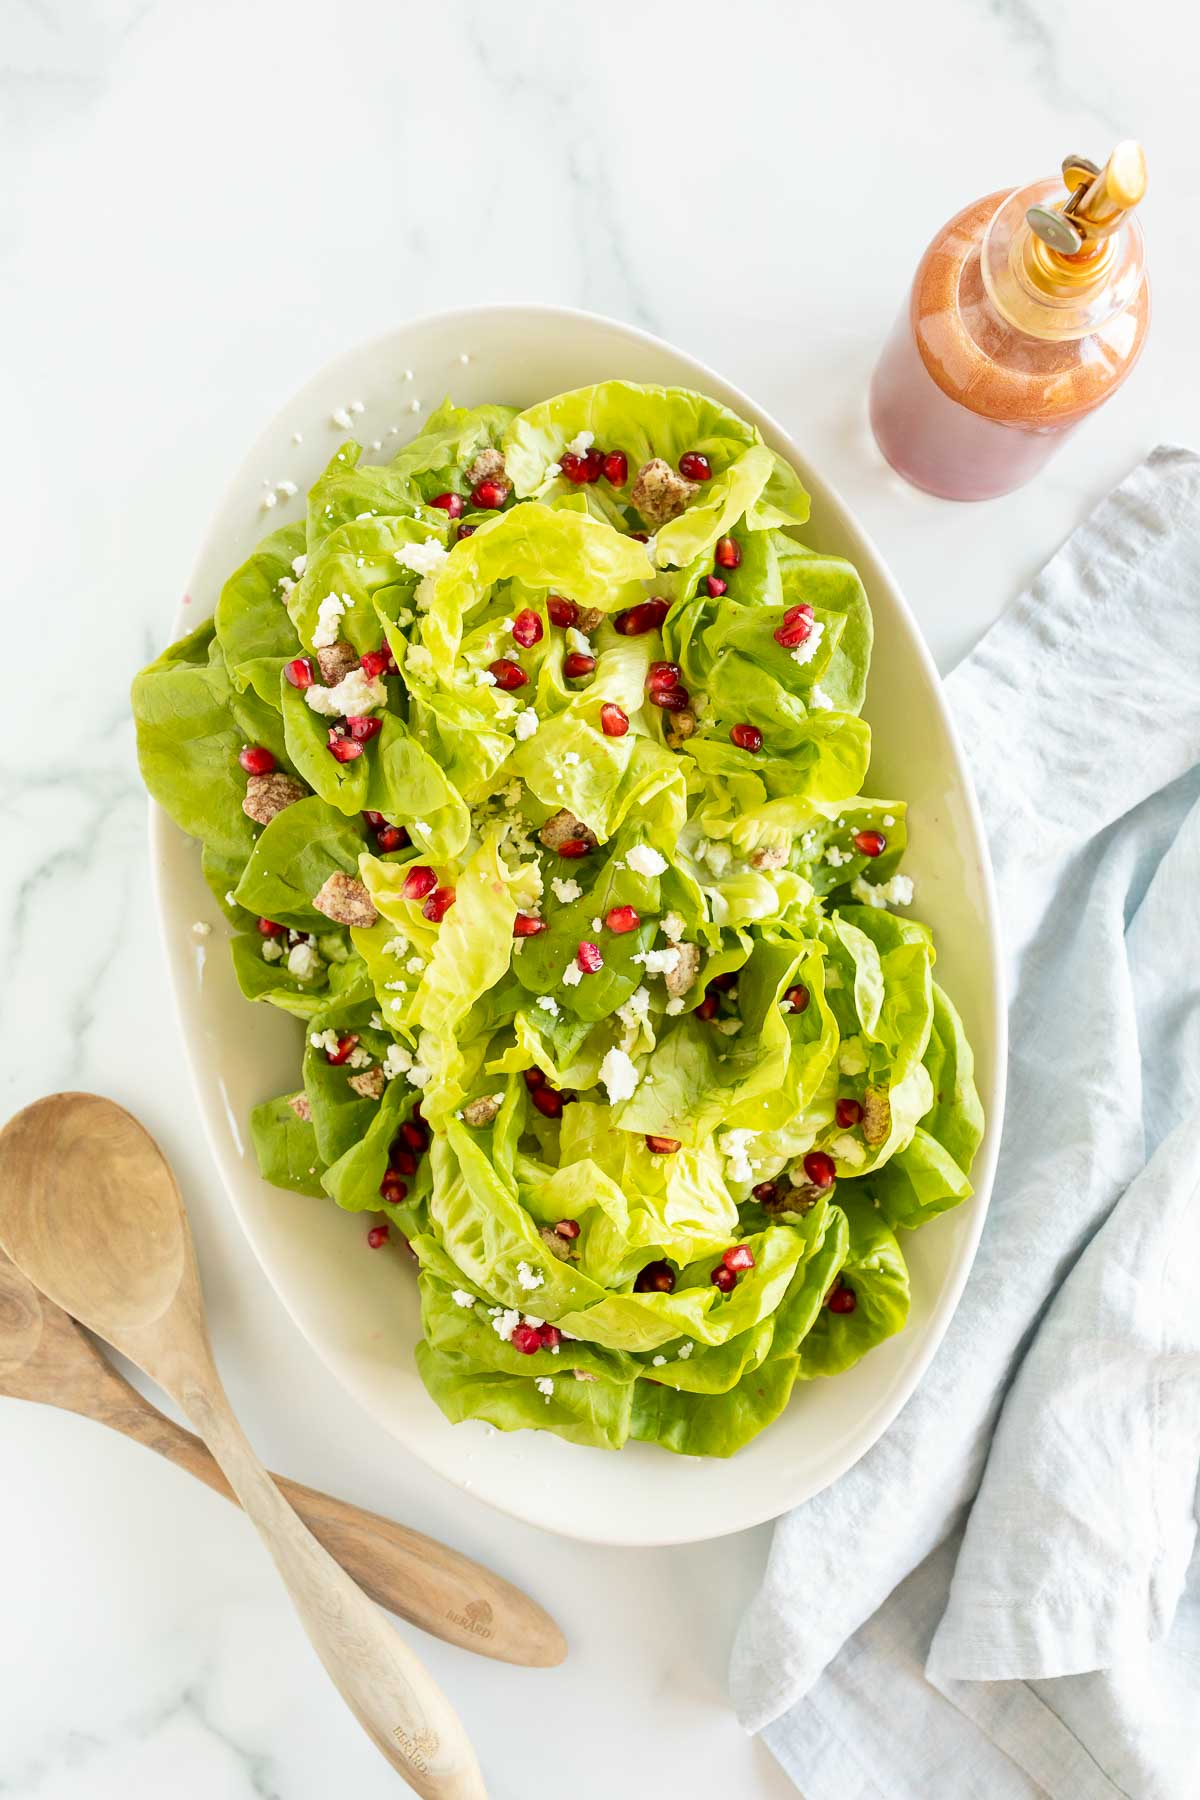 A pomegranate salad in a white oval bowl, with a bottle of homemade vinaigrette dressing next to it. 